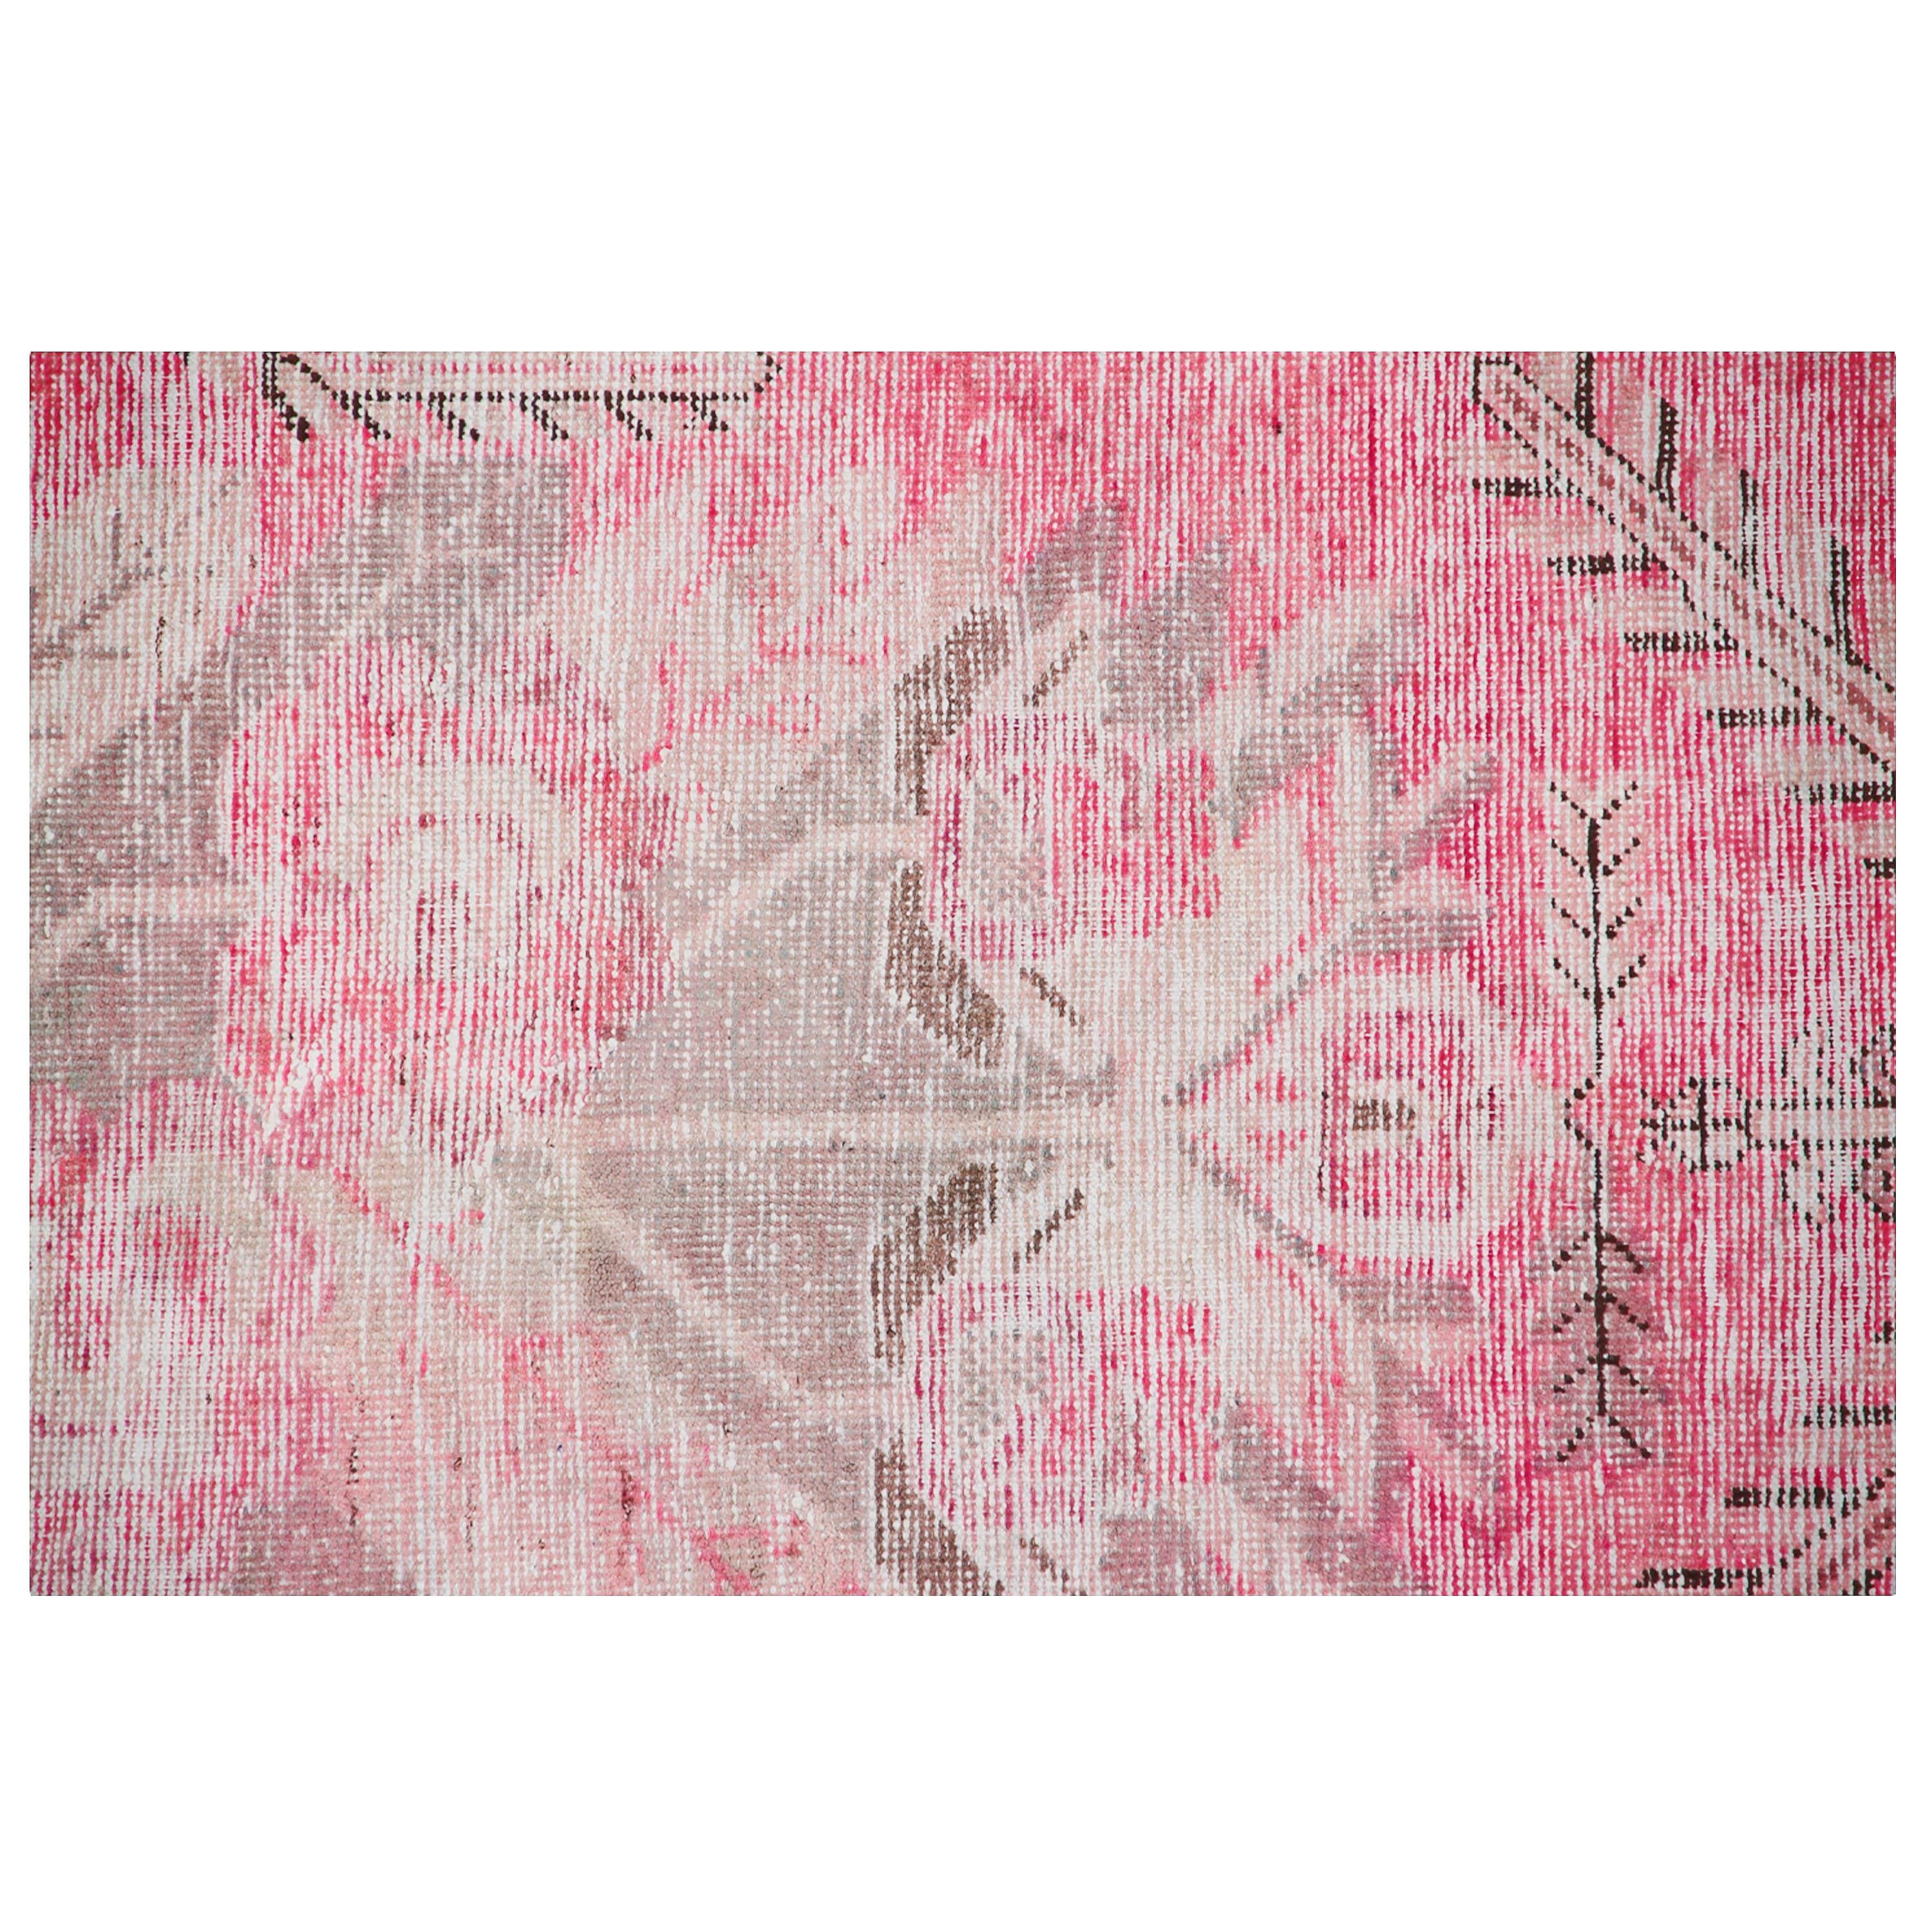 Sourced from the ancient Silk Road to bring a genuine one-of-a-kind rug to your home, this Pink Vintage Wool Cotton Blend Rug - 4'5